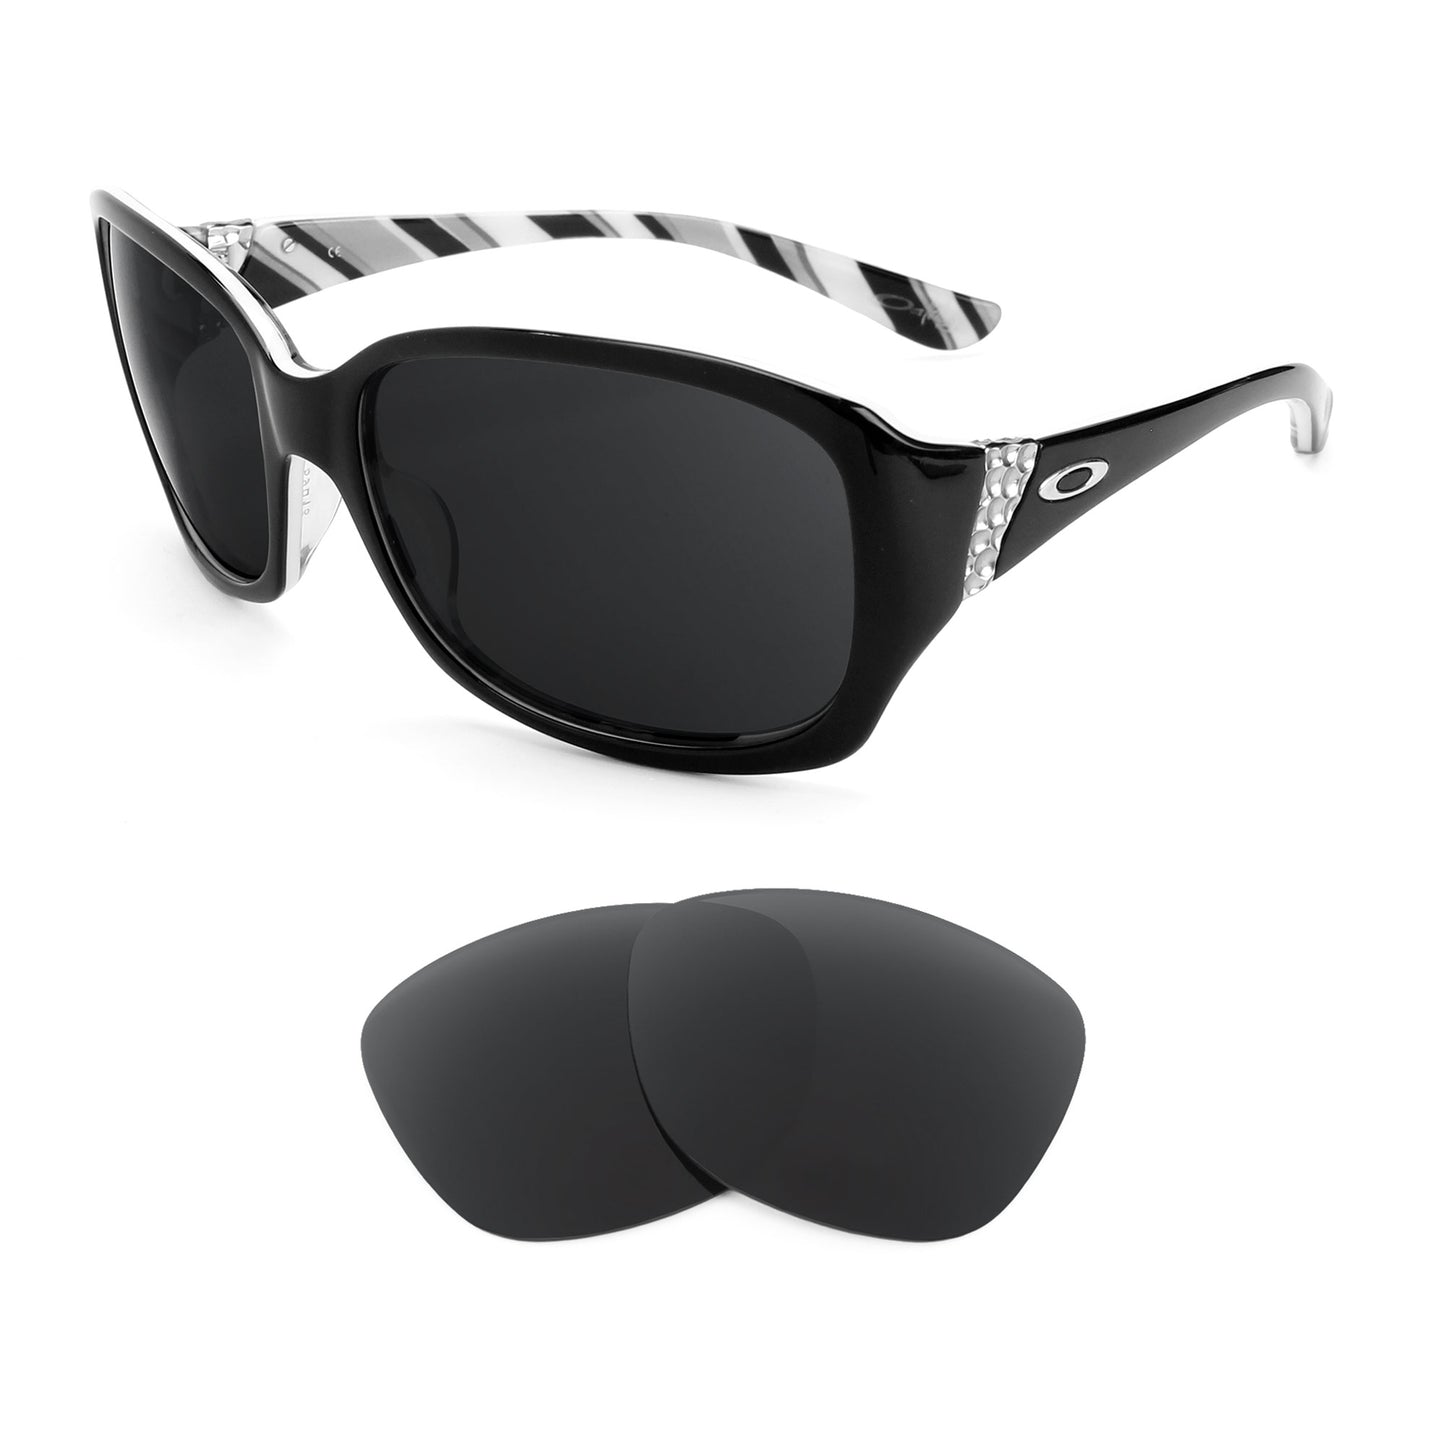 Oakley Discreet sunglasses with replacement lenses